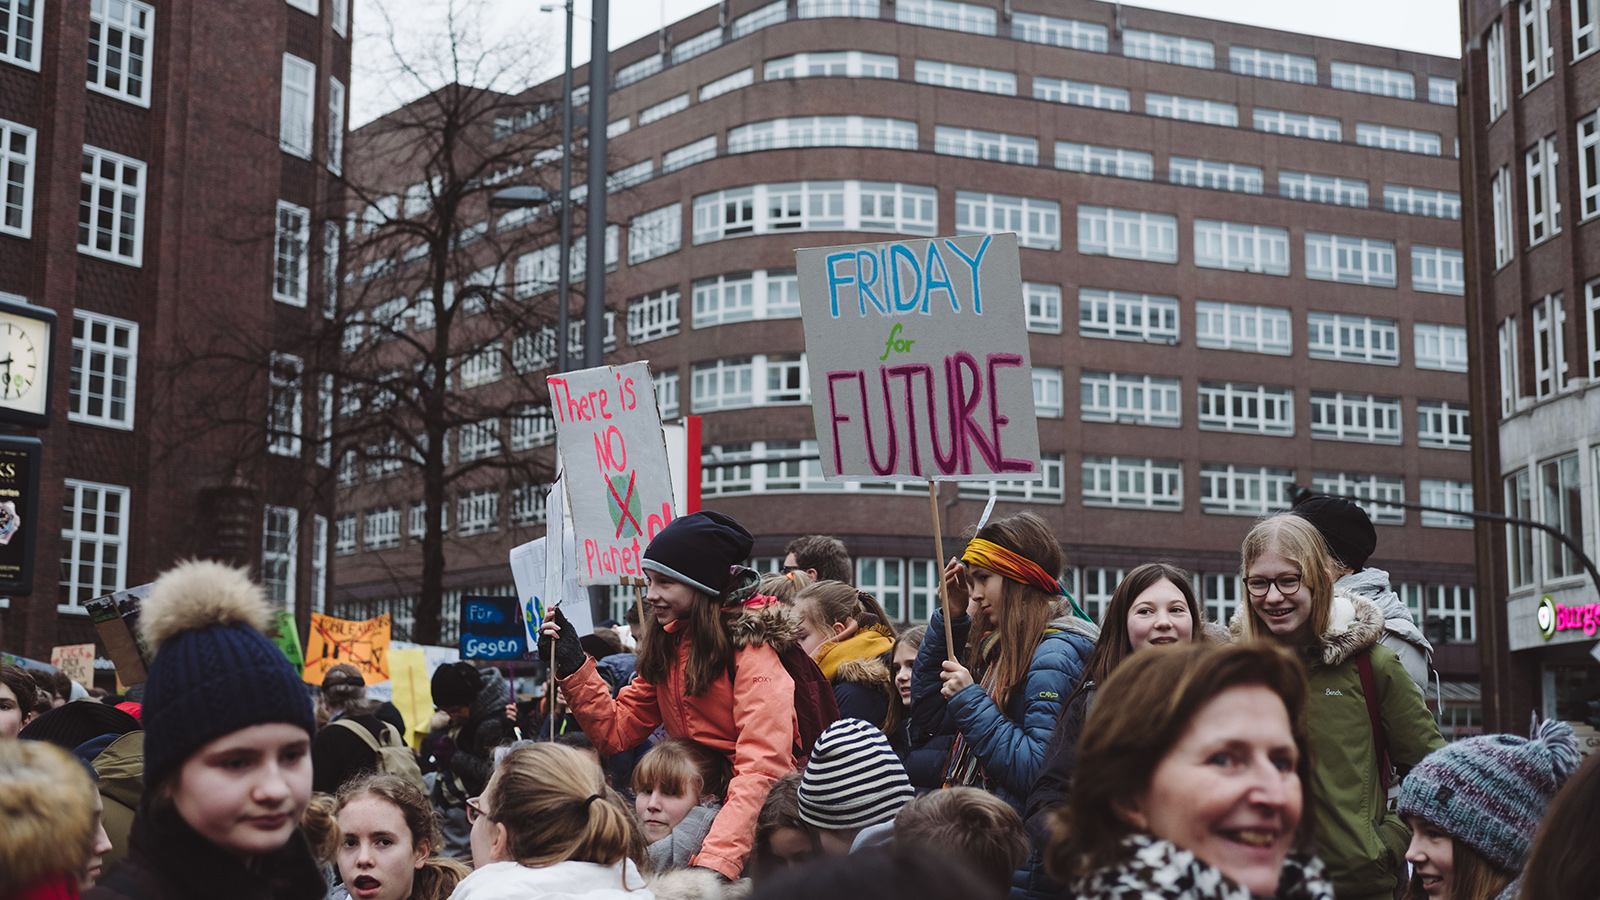 ecosia-joins-climate-strike-march-fridays-for-the-future-greta-thunberg-2